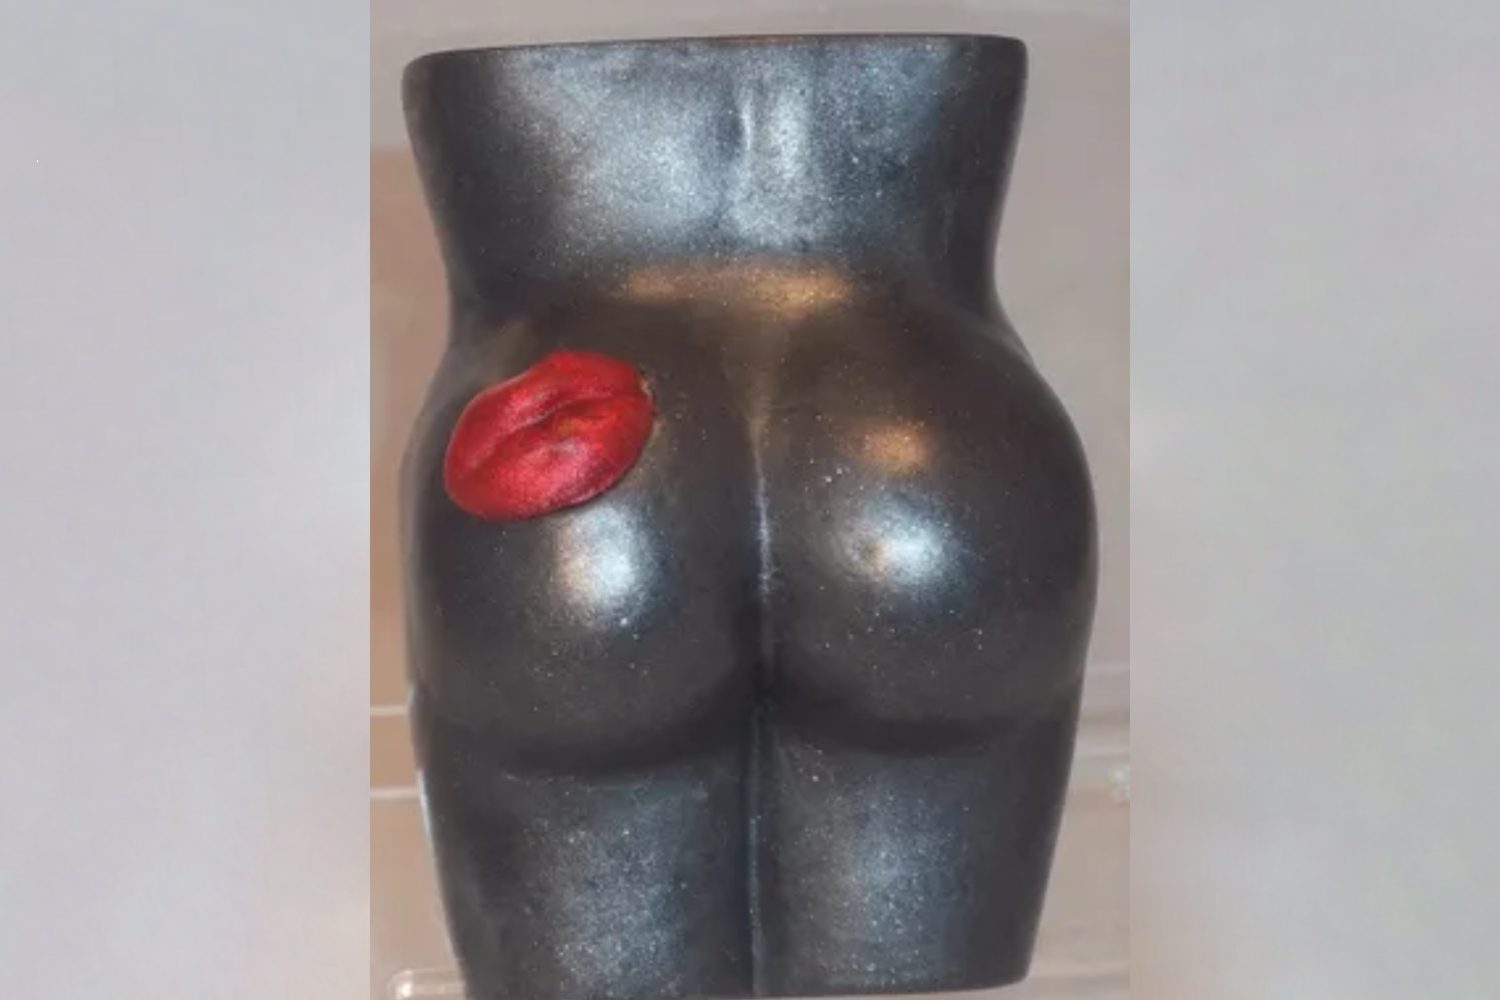 A black statue of a woman 's butt with red lips.